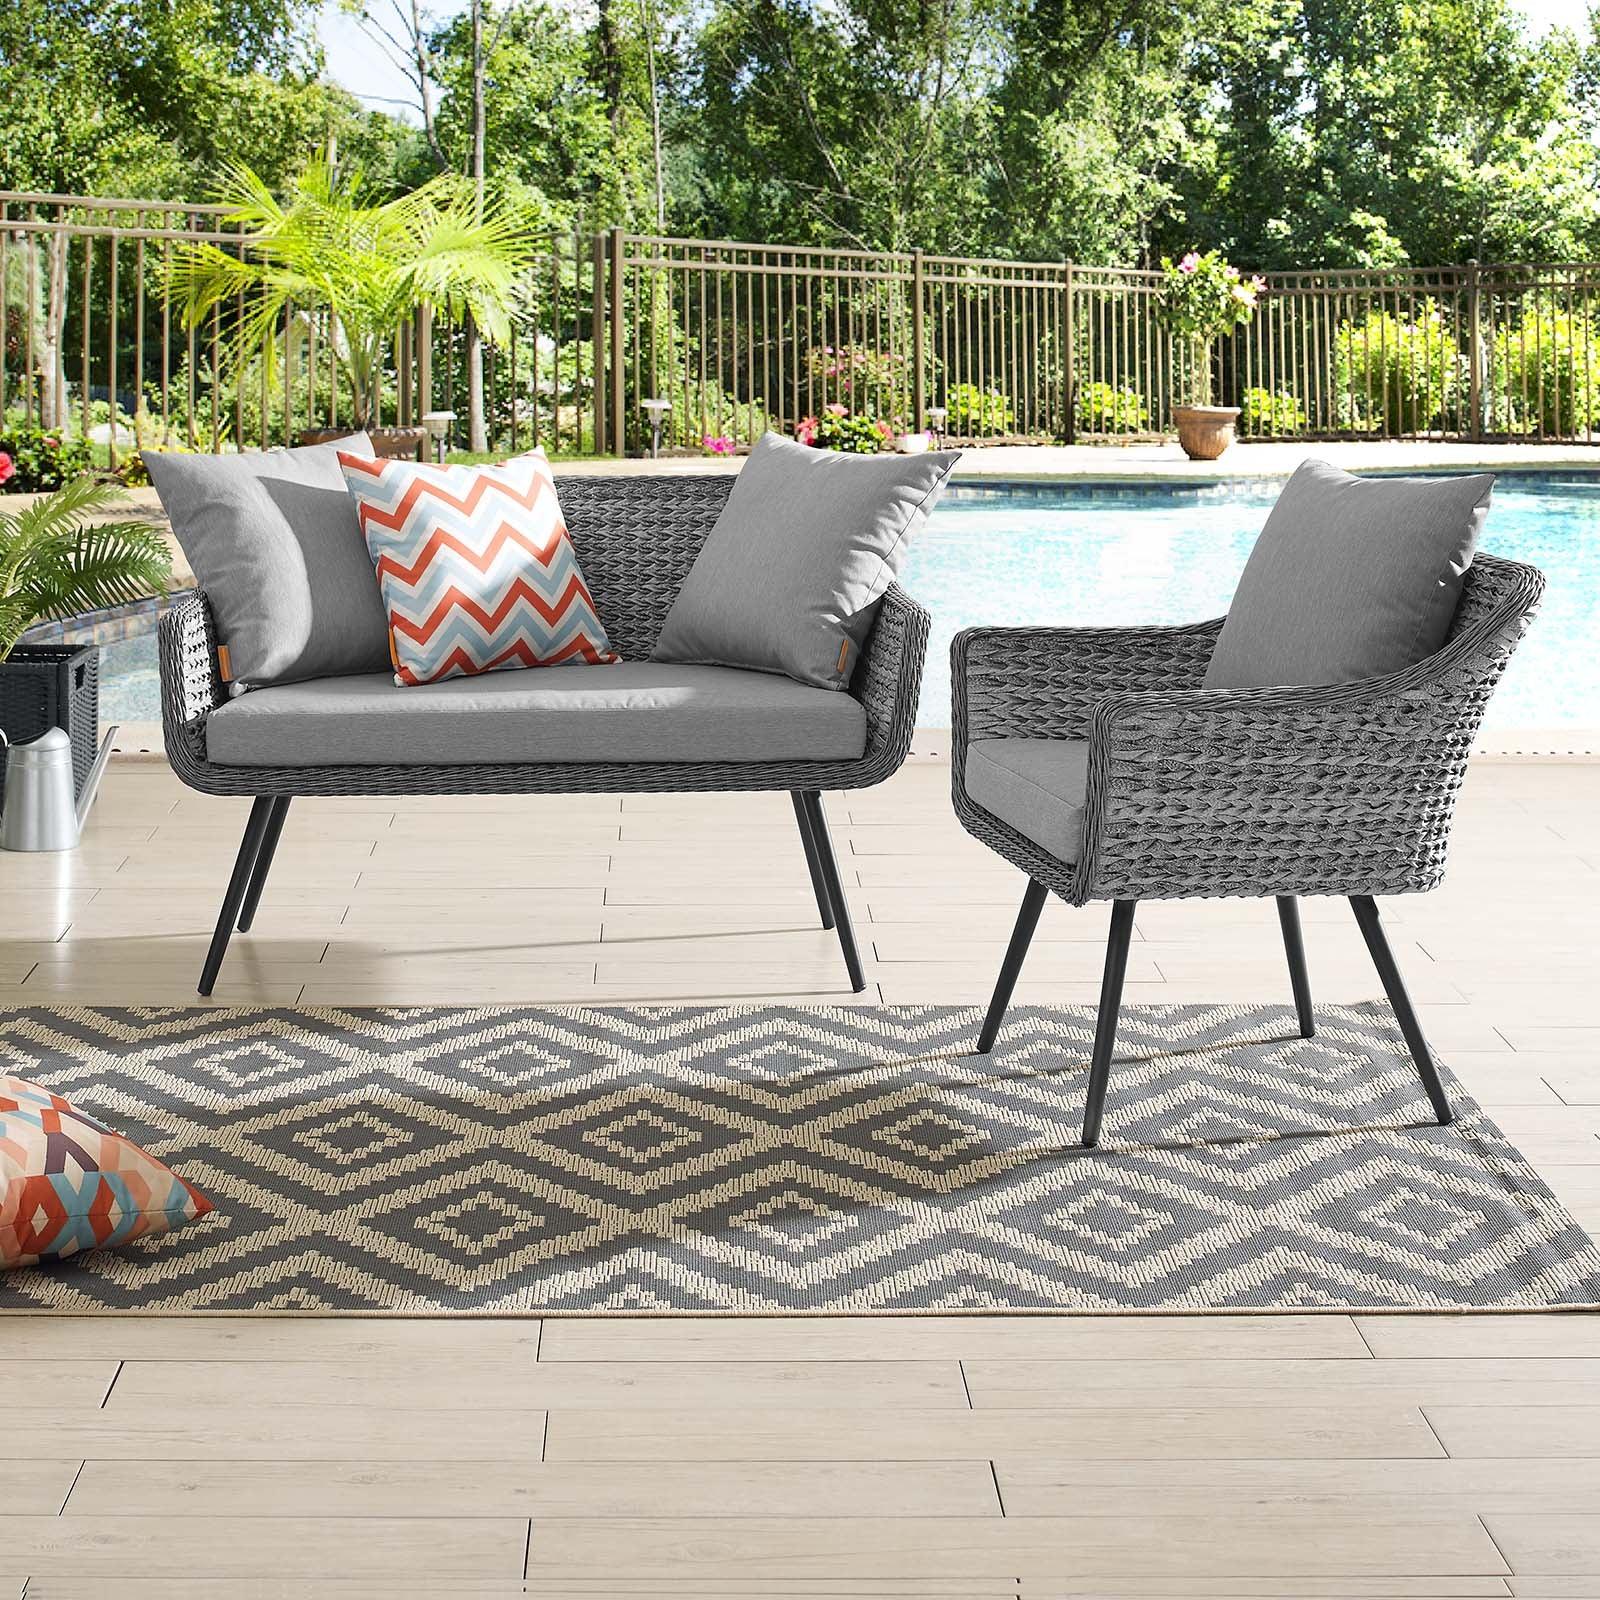 Modway Endeavor 2 Piece Outdoor Patio Wicker Rattan Loveseat and Armchair Set FredCo